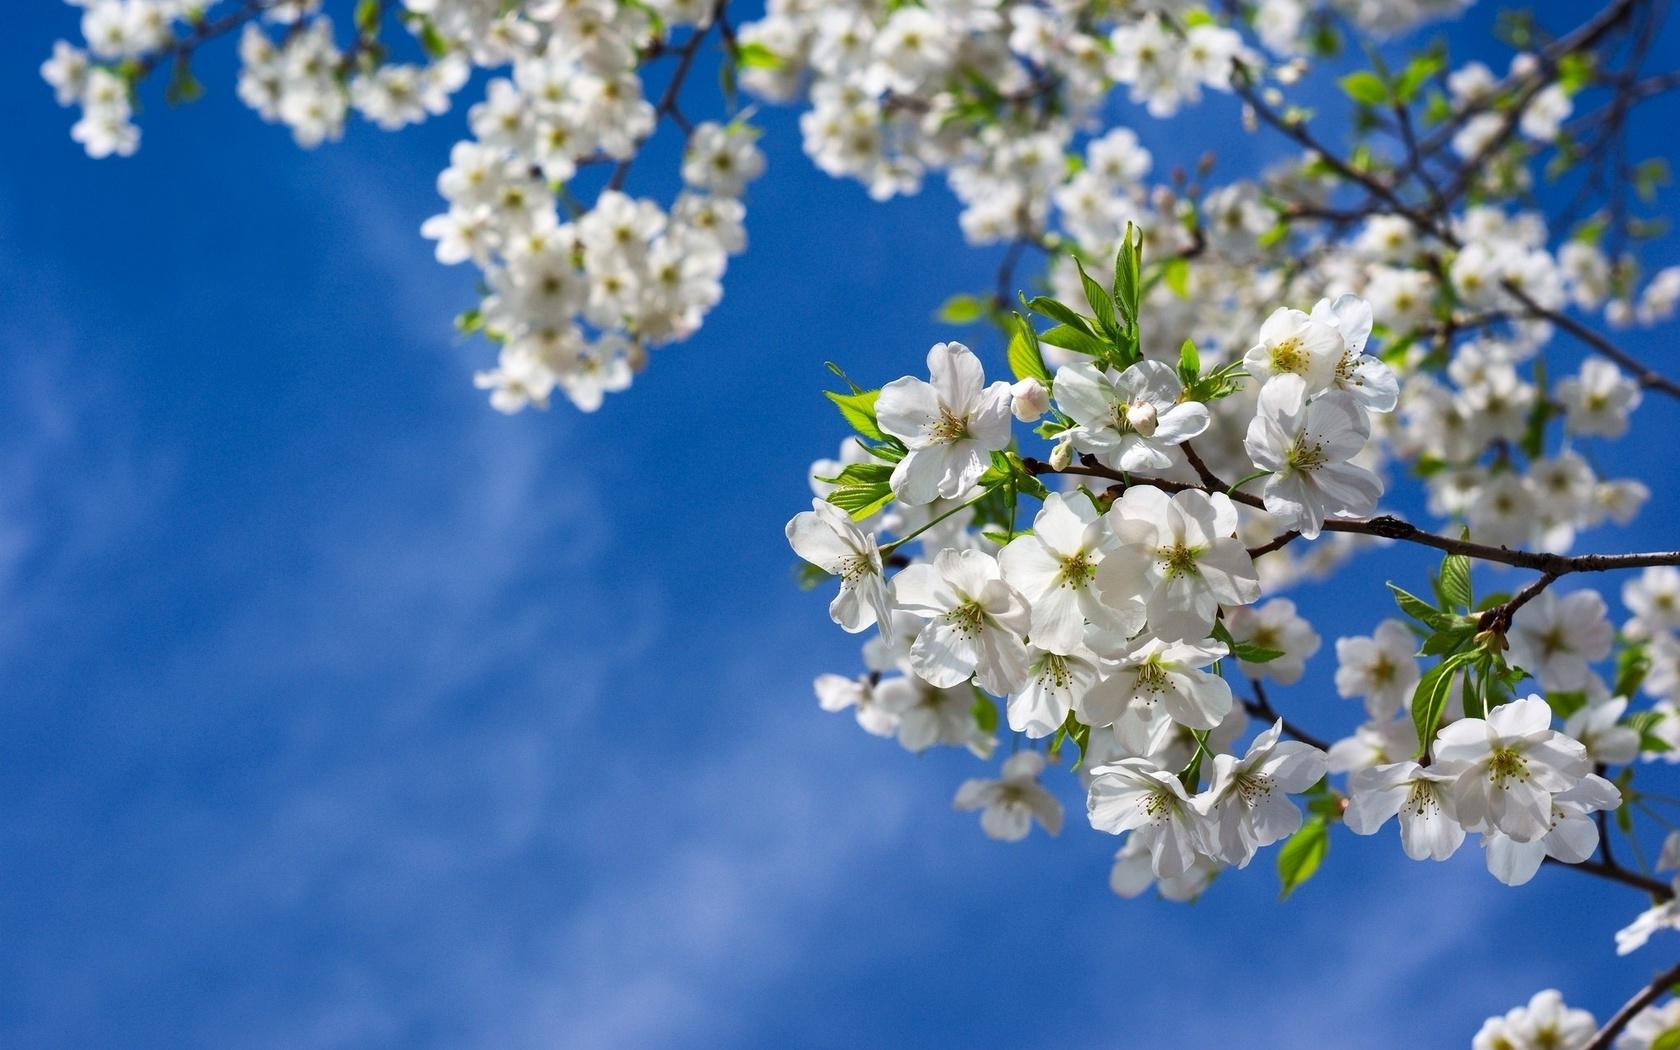 , , , , , , , , spring, tree, branches, nature, flowers, cherries, leaves, sky